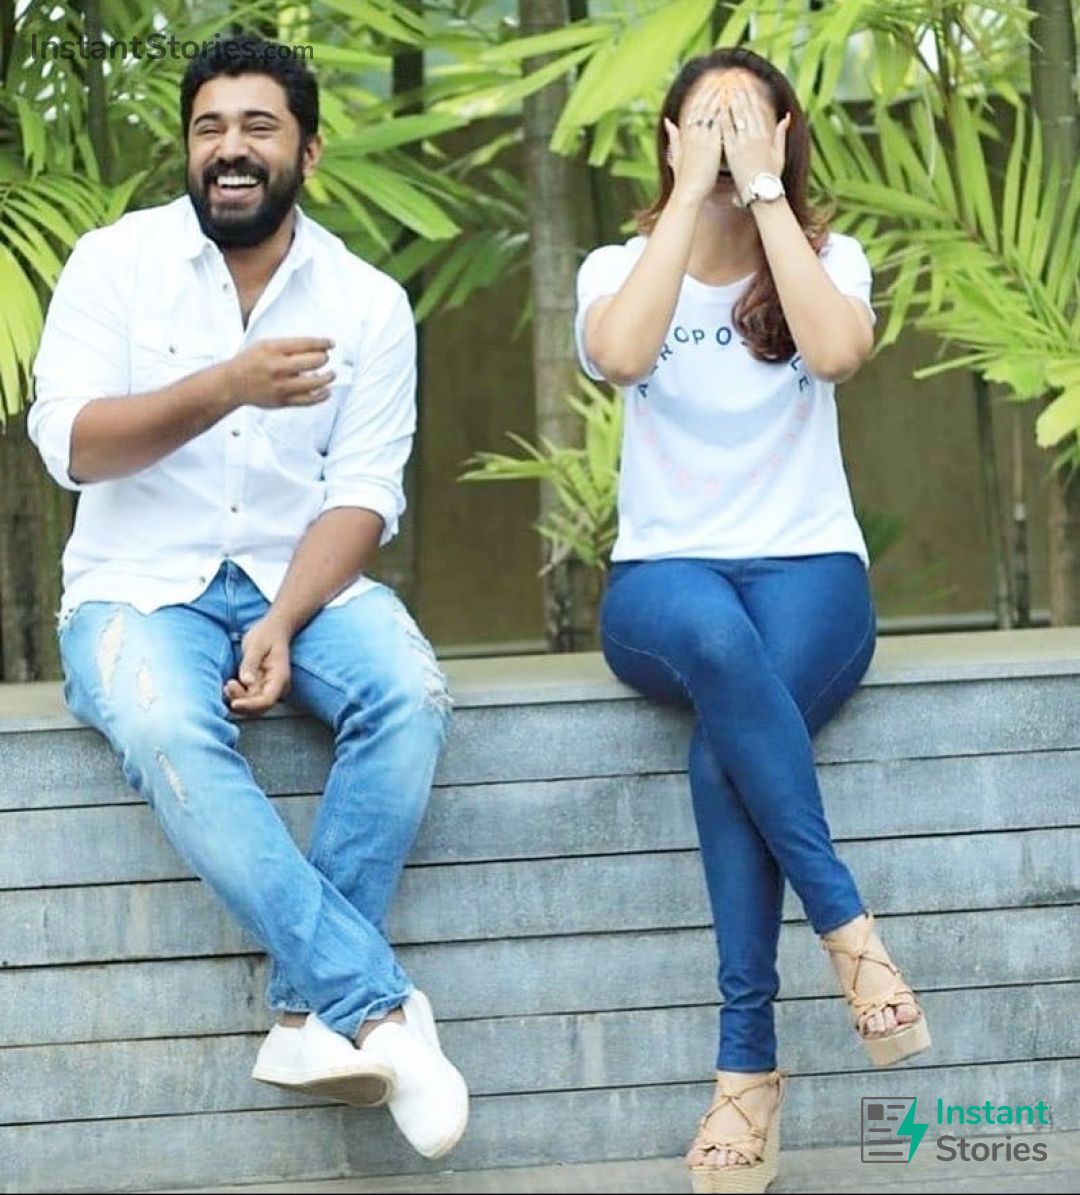 Nivin Pauly and Nayanthara starred Love Action Drama Movie HD Photos and posters (42) - Nivin Pauly, Nayanthara, Love Action Drama (2019)